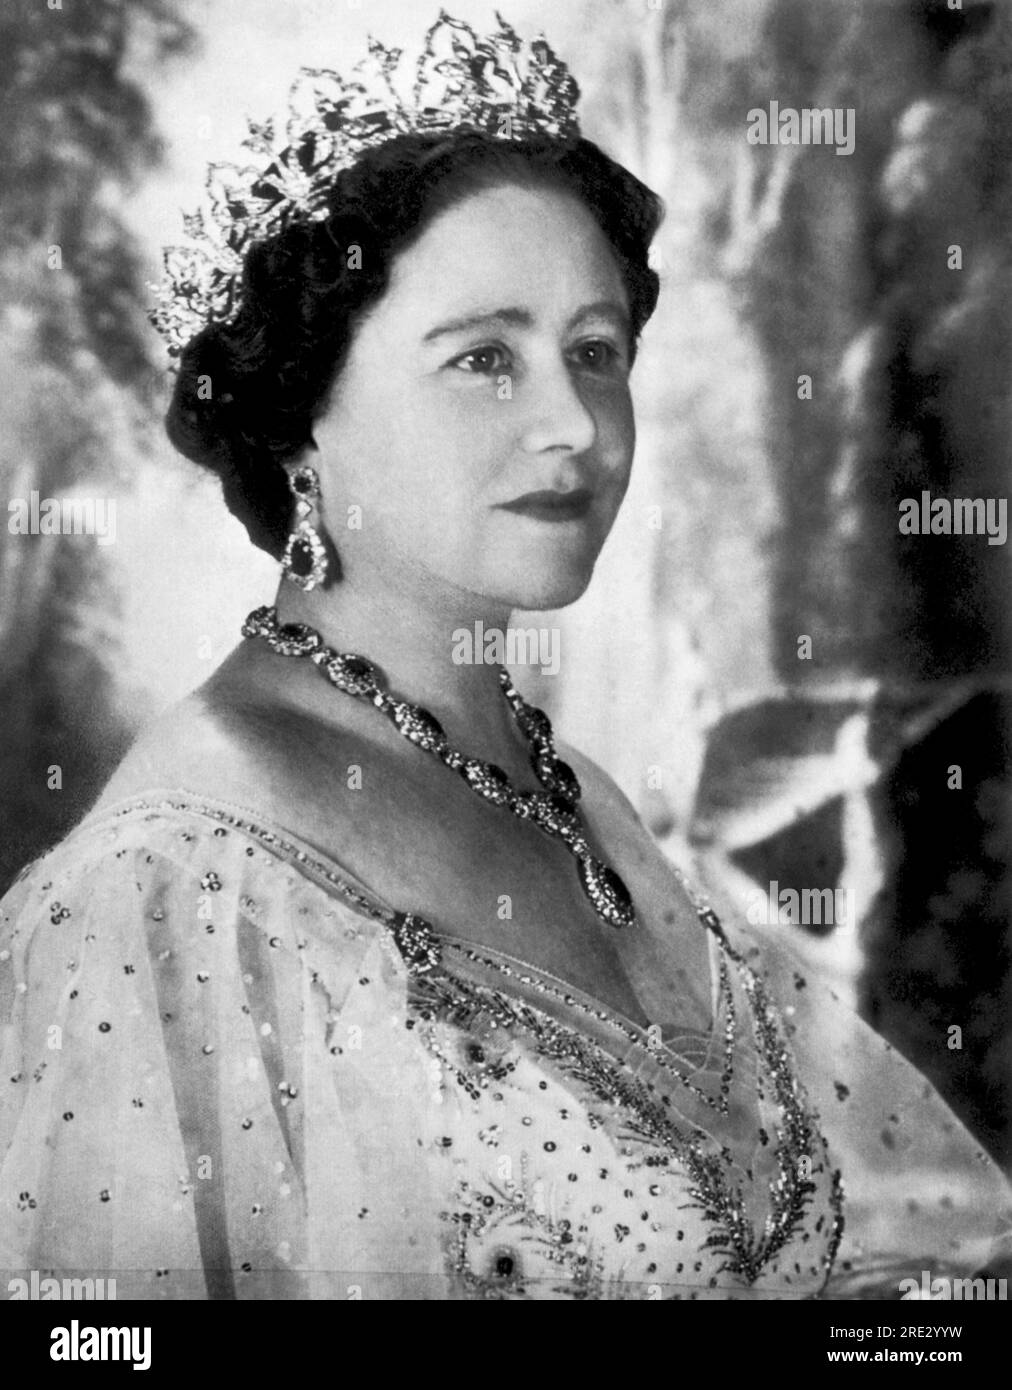 London, England:    1950 A portrait of Elizabeth Bowes-Lyon, Queen Elizabeth The Queen Mother on her 50th birthday. Stock Photo